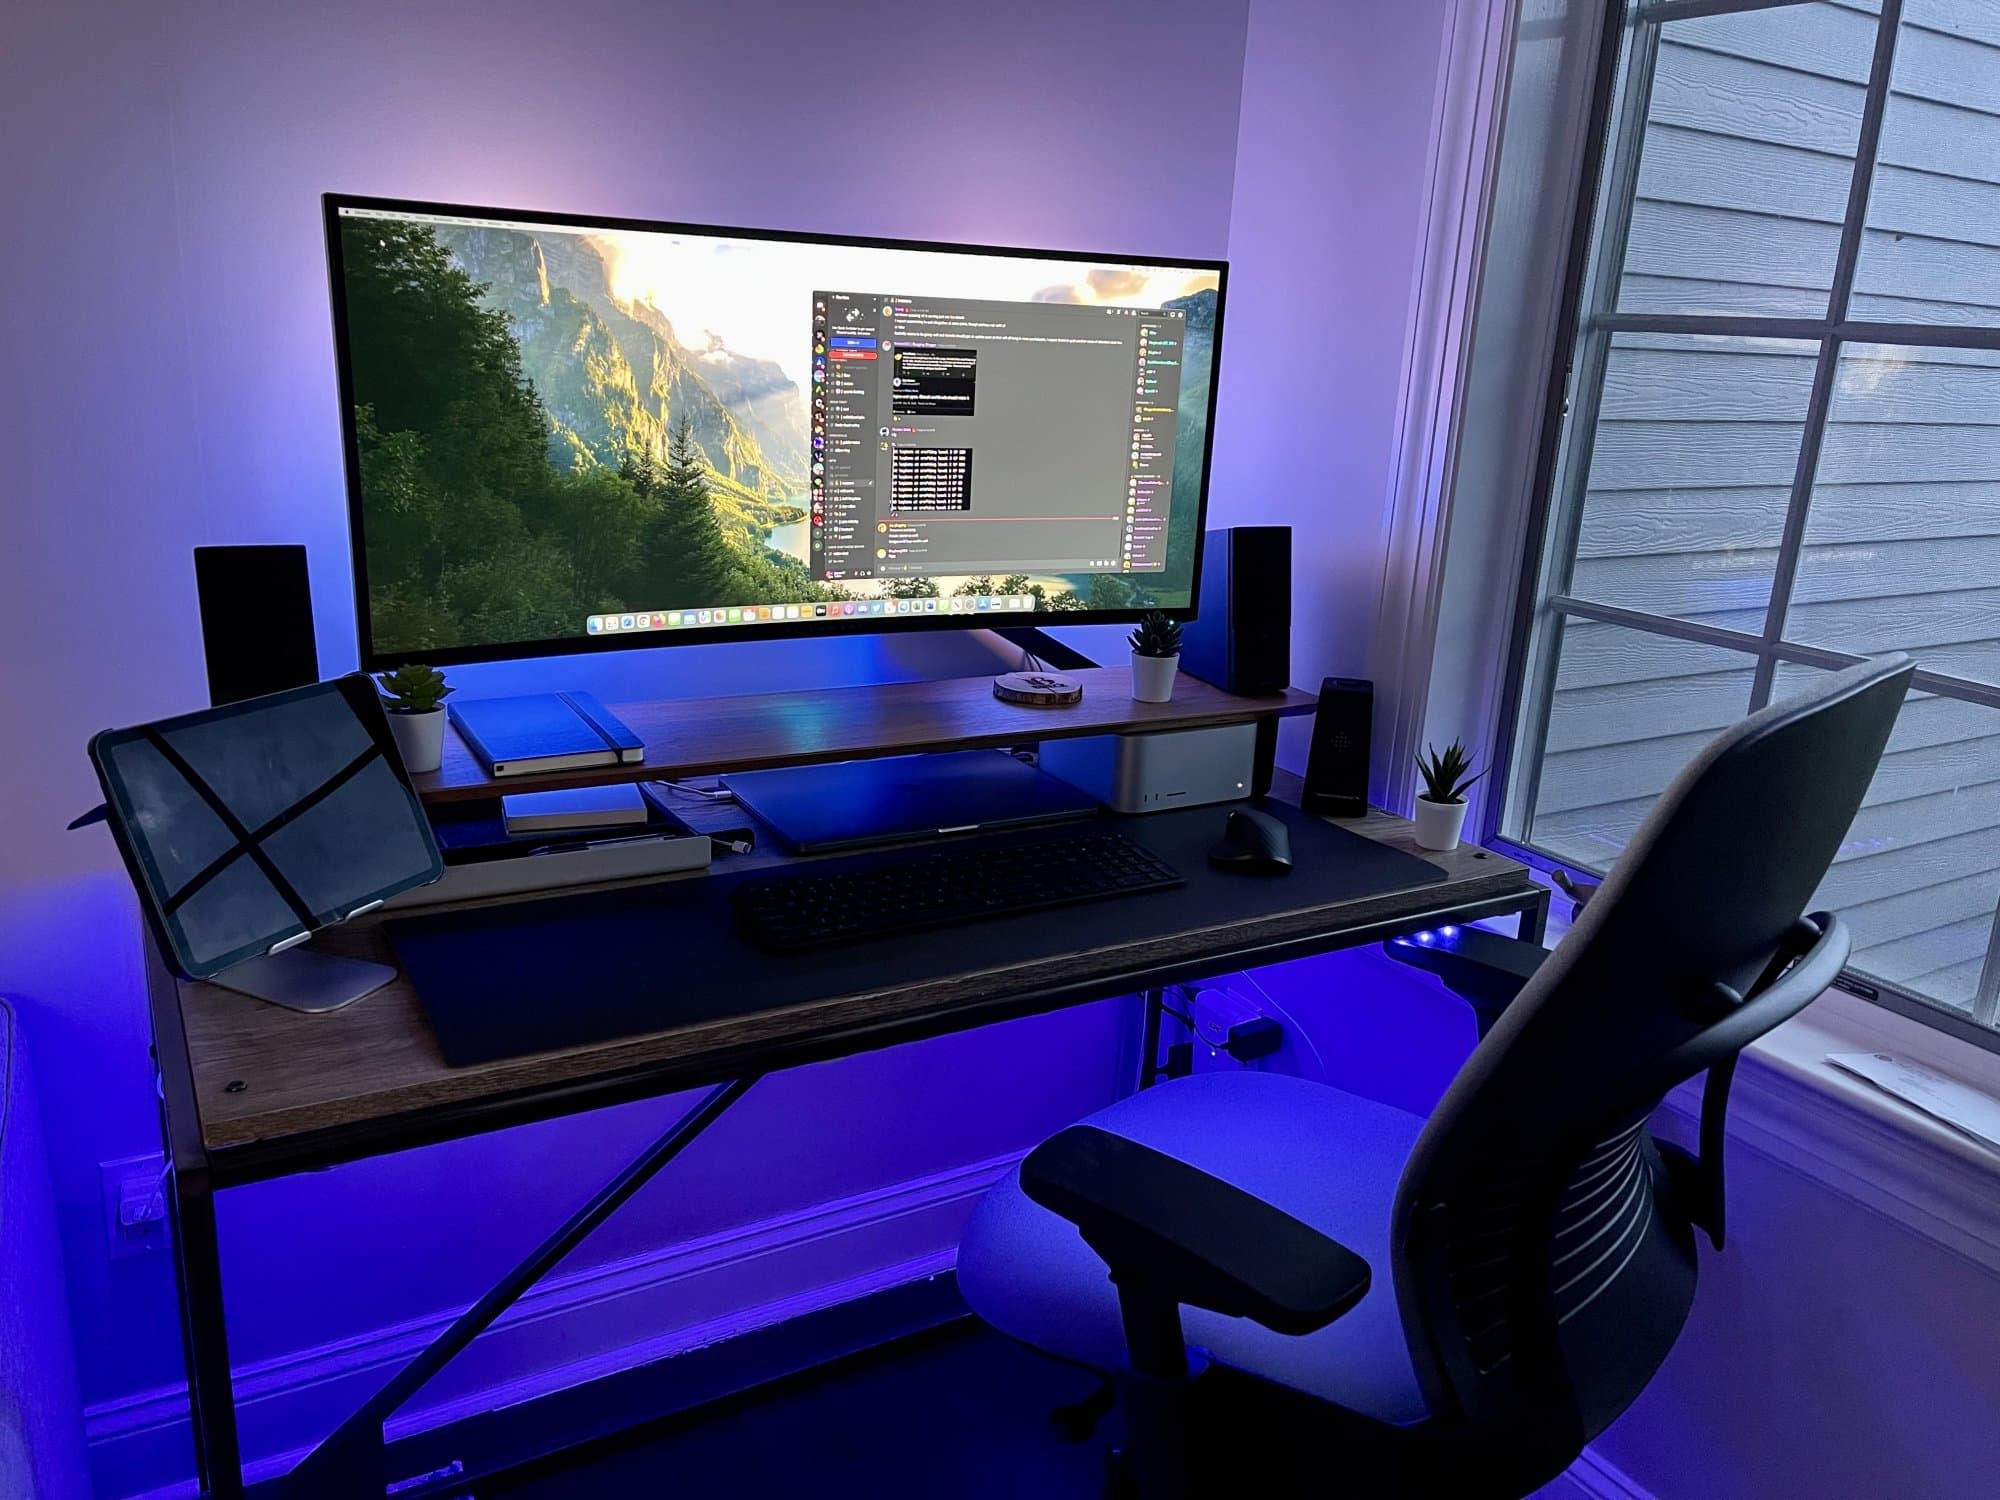 Here's another example of a new Mac Studio-driven setup.